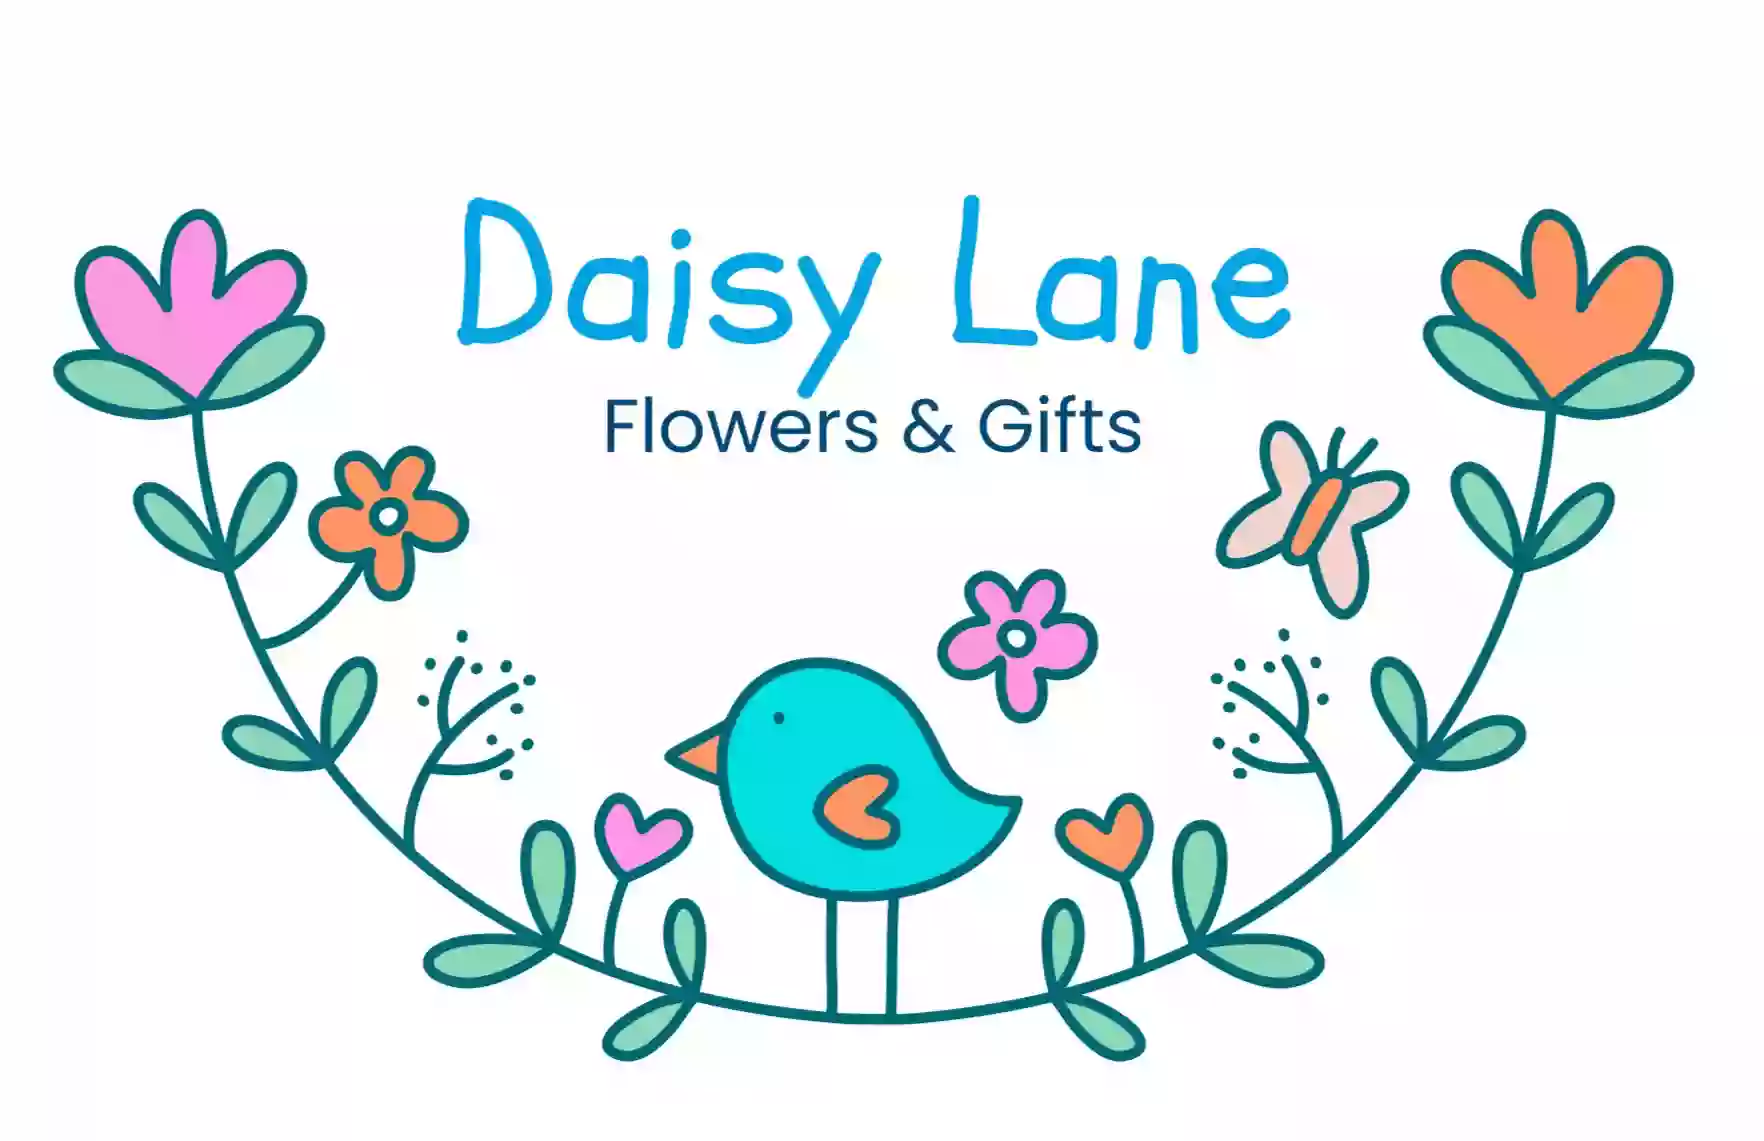 Daisy Lane Dried Flowers & Gifts